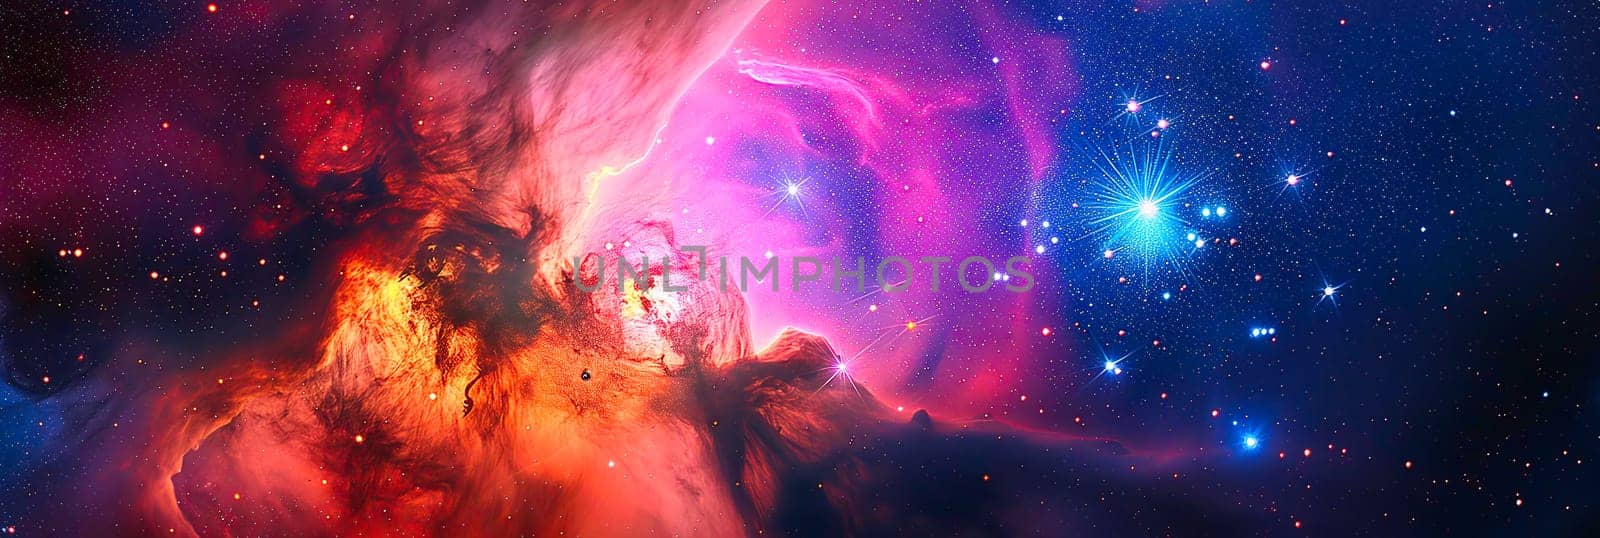 An image of a colorful space scene with stars by vladimka